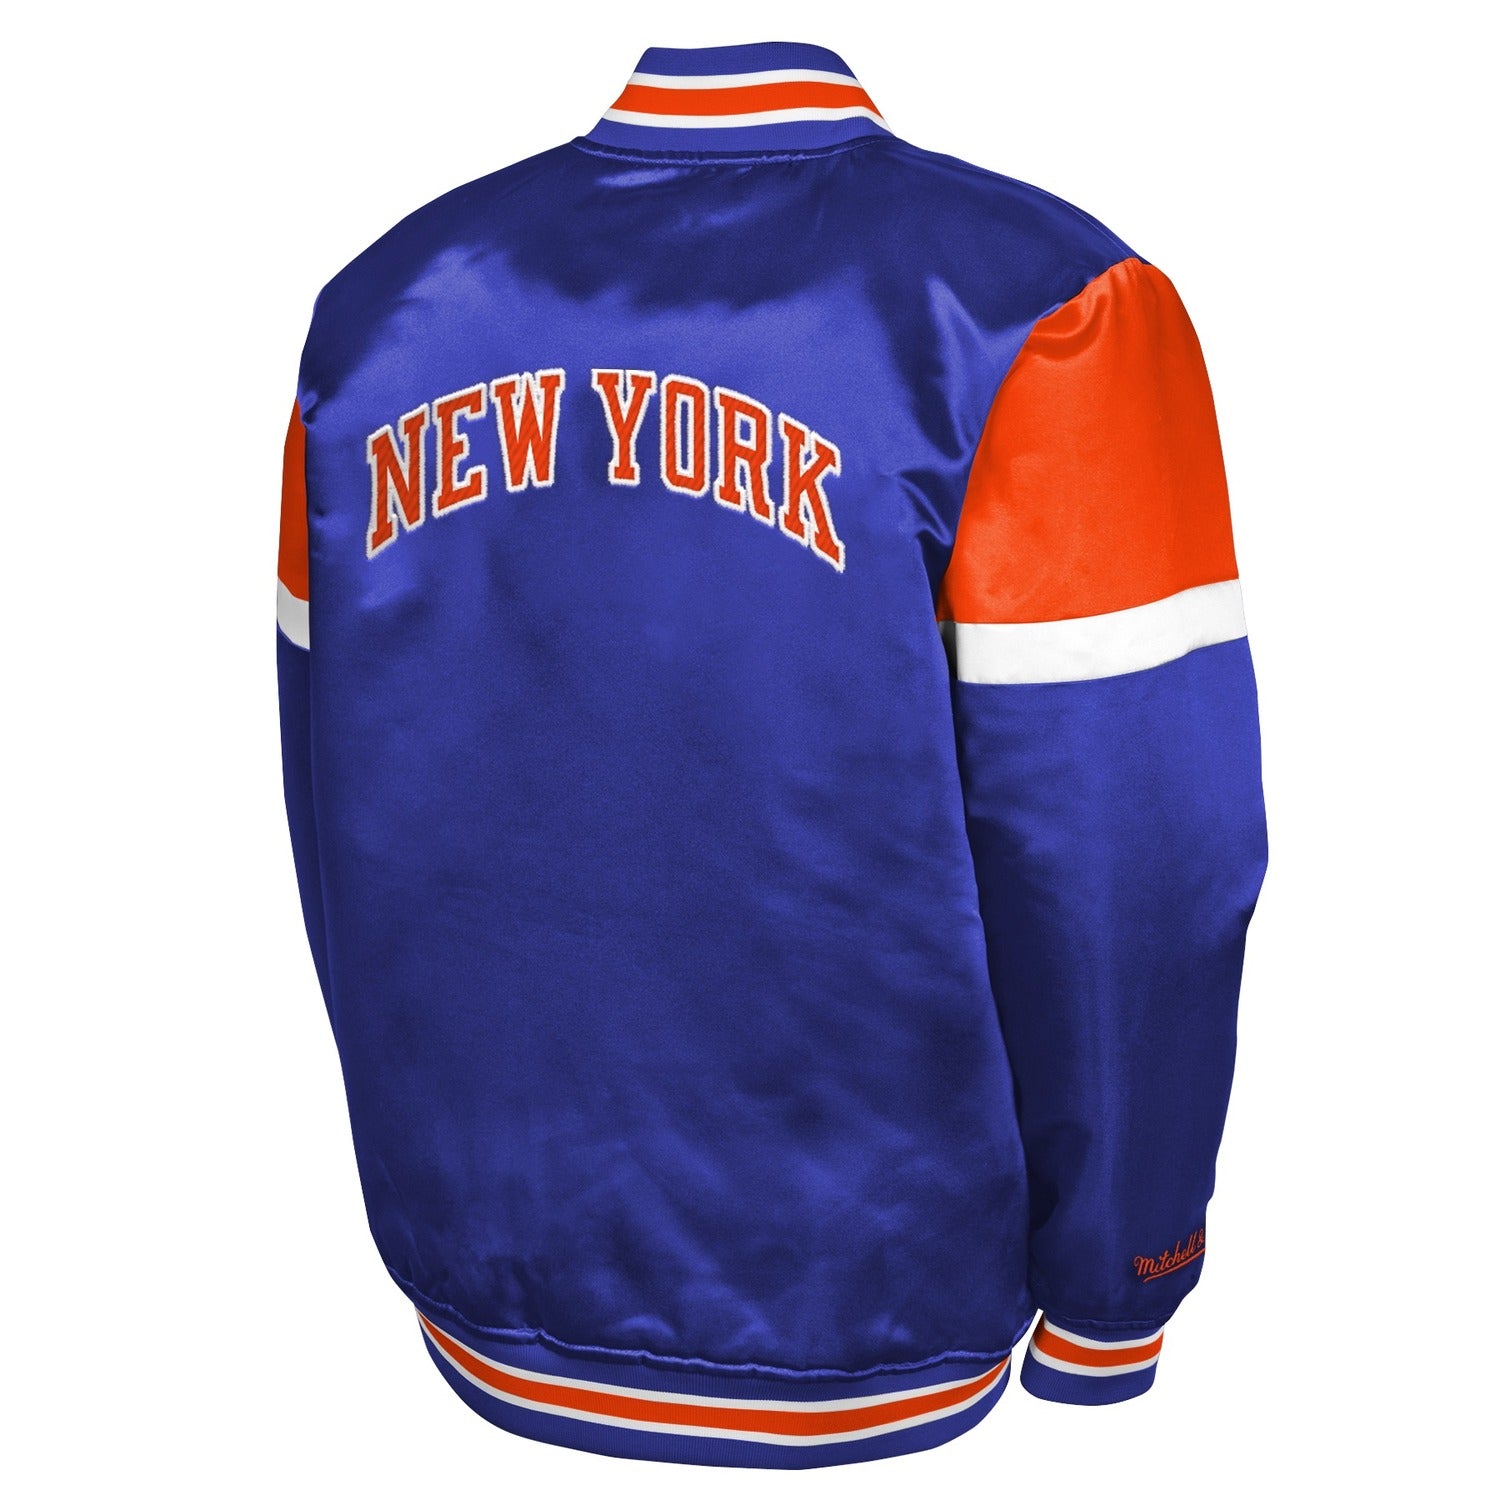 New York Knicks Toddler Heavy Weight Satin Jacket - Back View